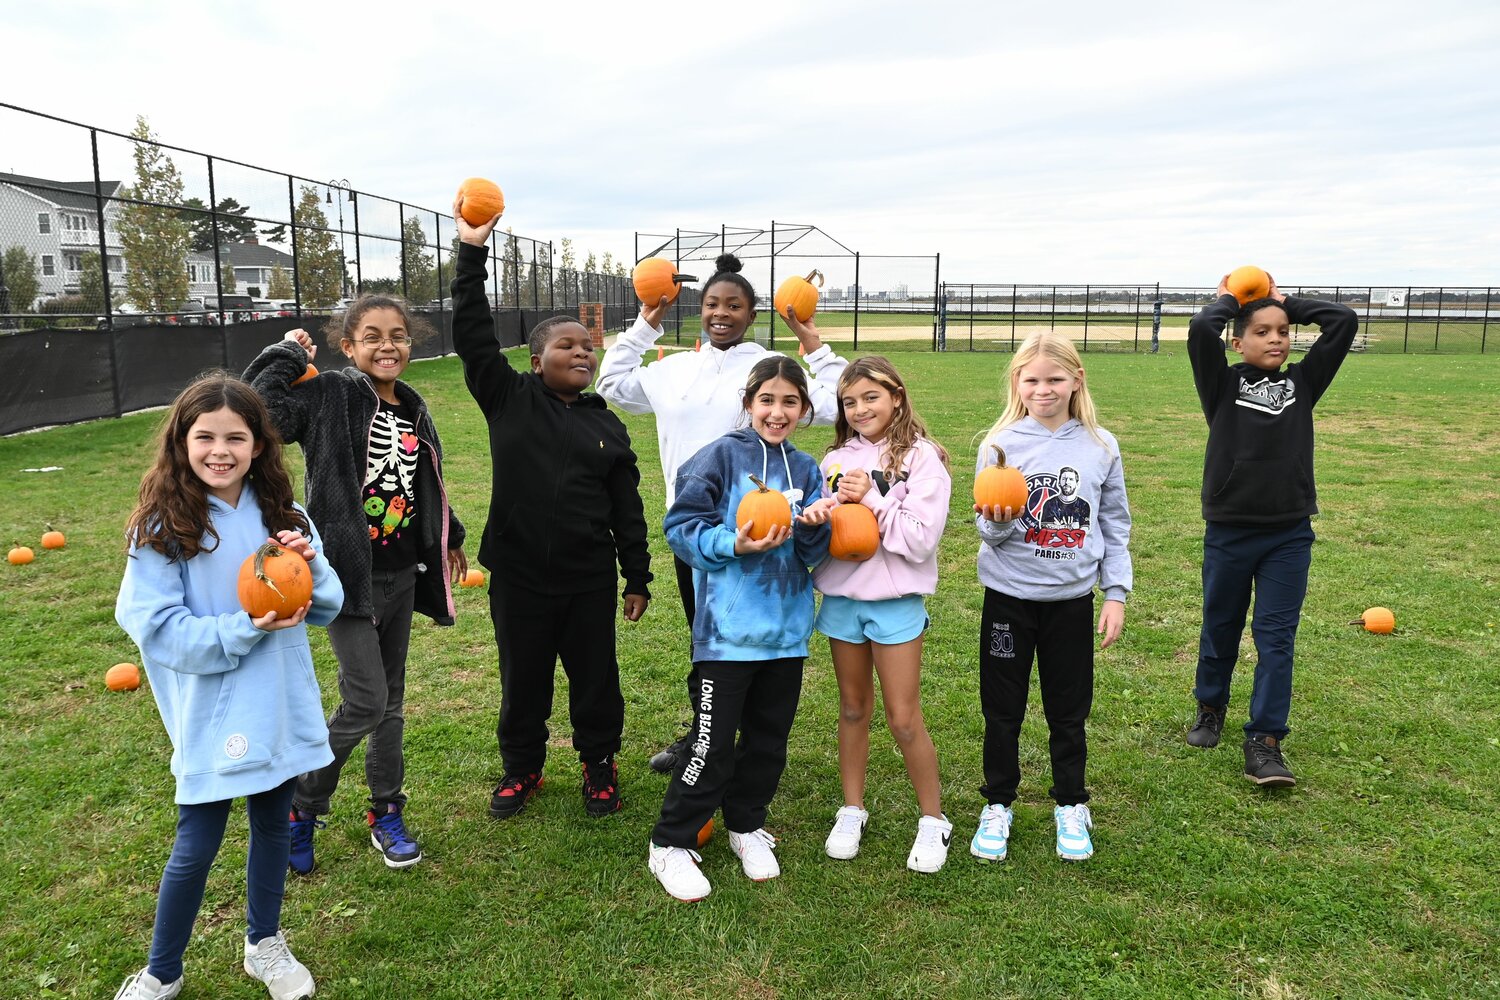 Lindell Elementary students took part in a Fall Festival, with lots of pumpkins.